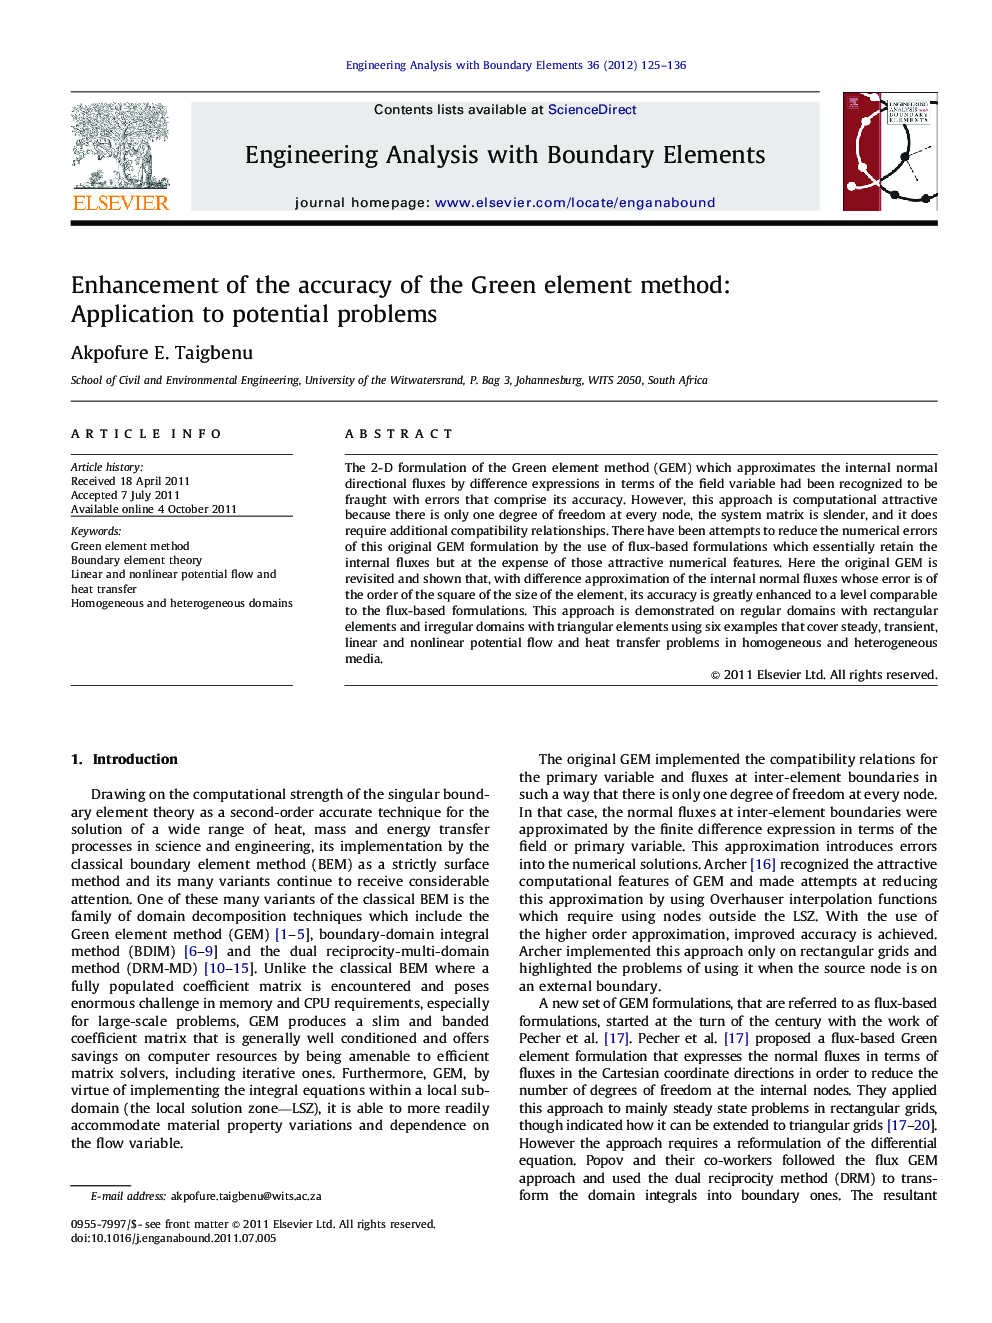 Enhancement of the accuracy of the Green element method: Application to potential problems